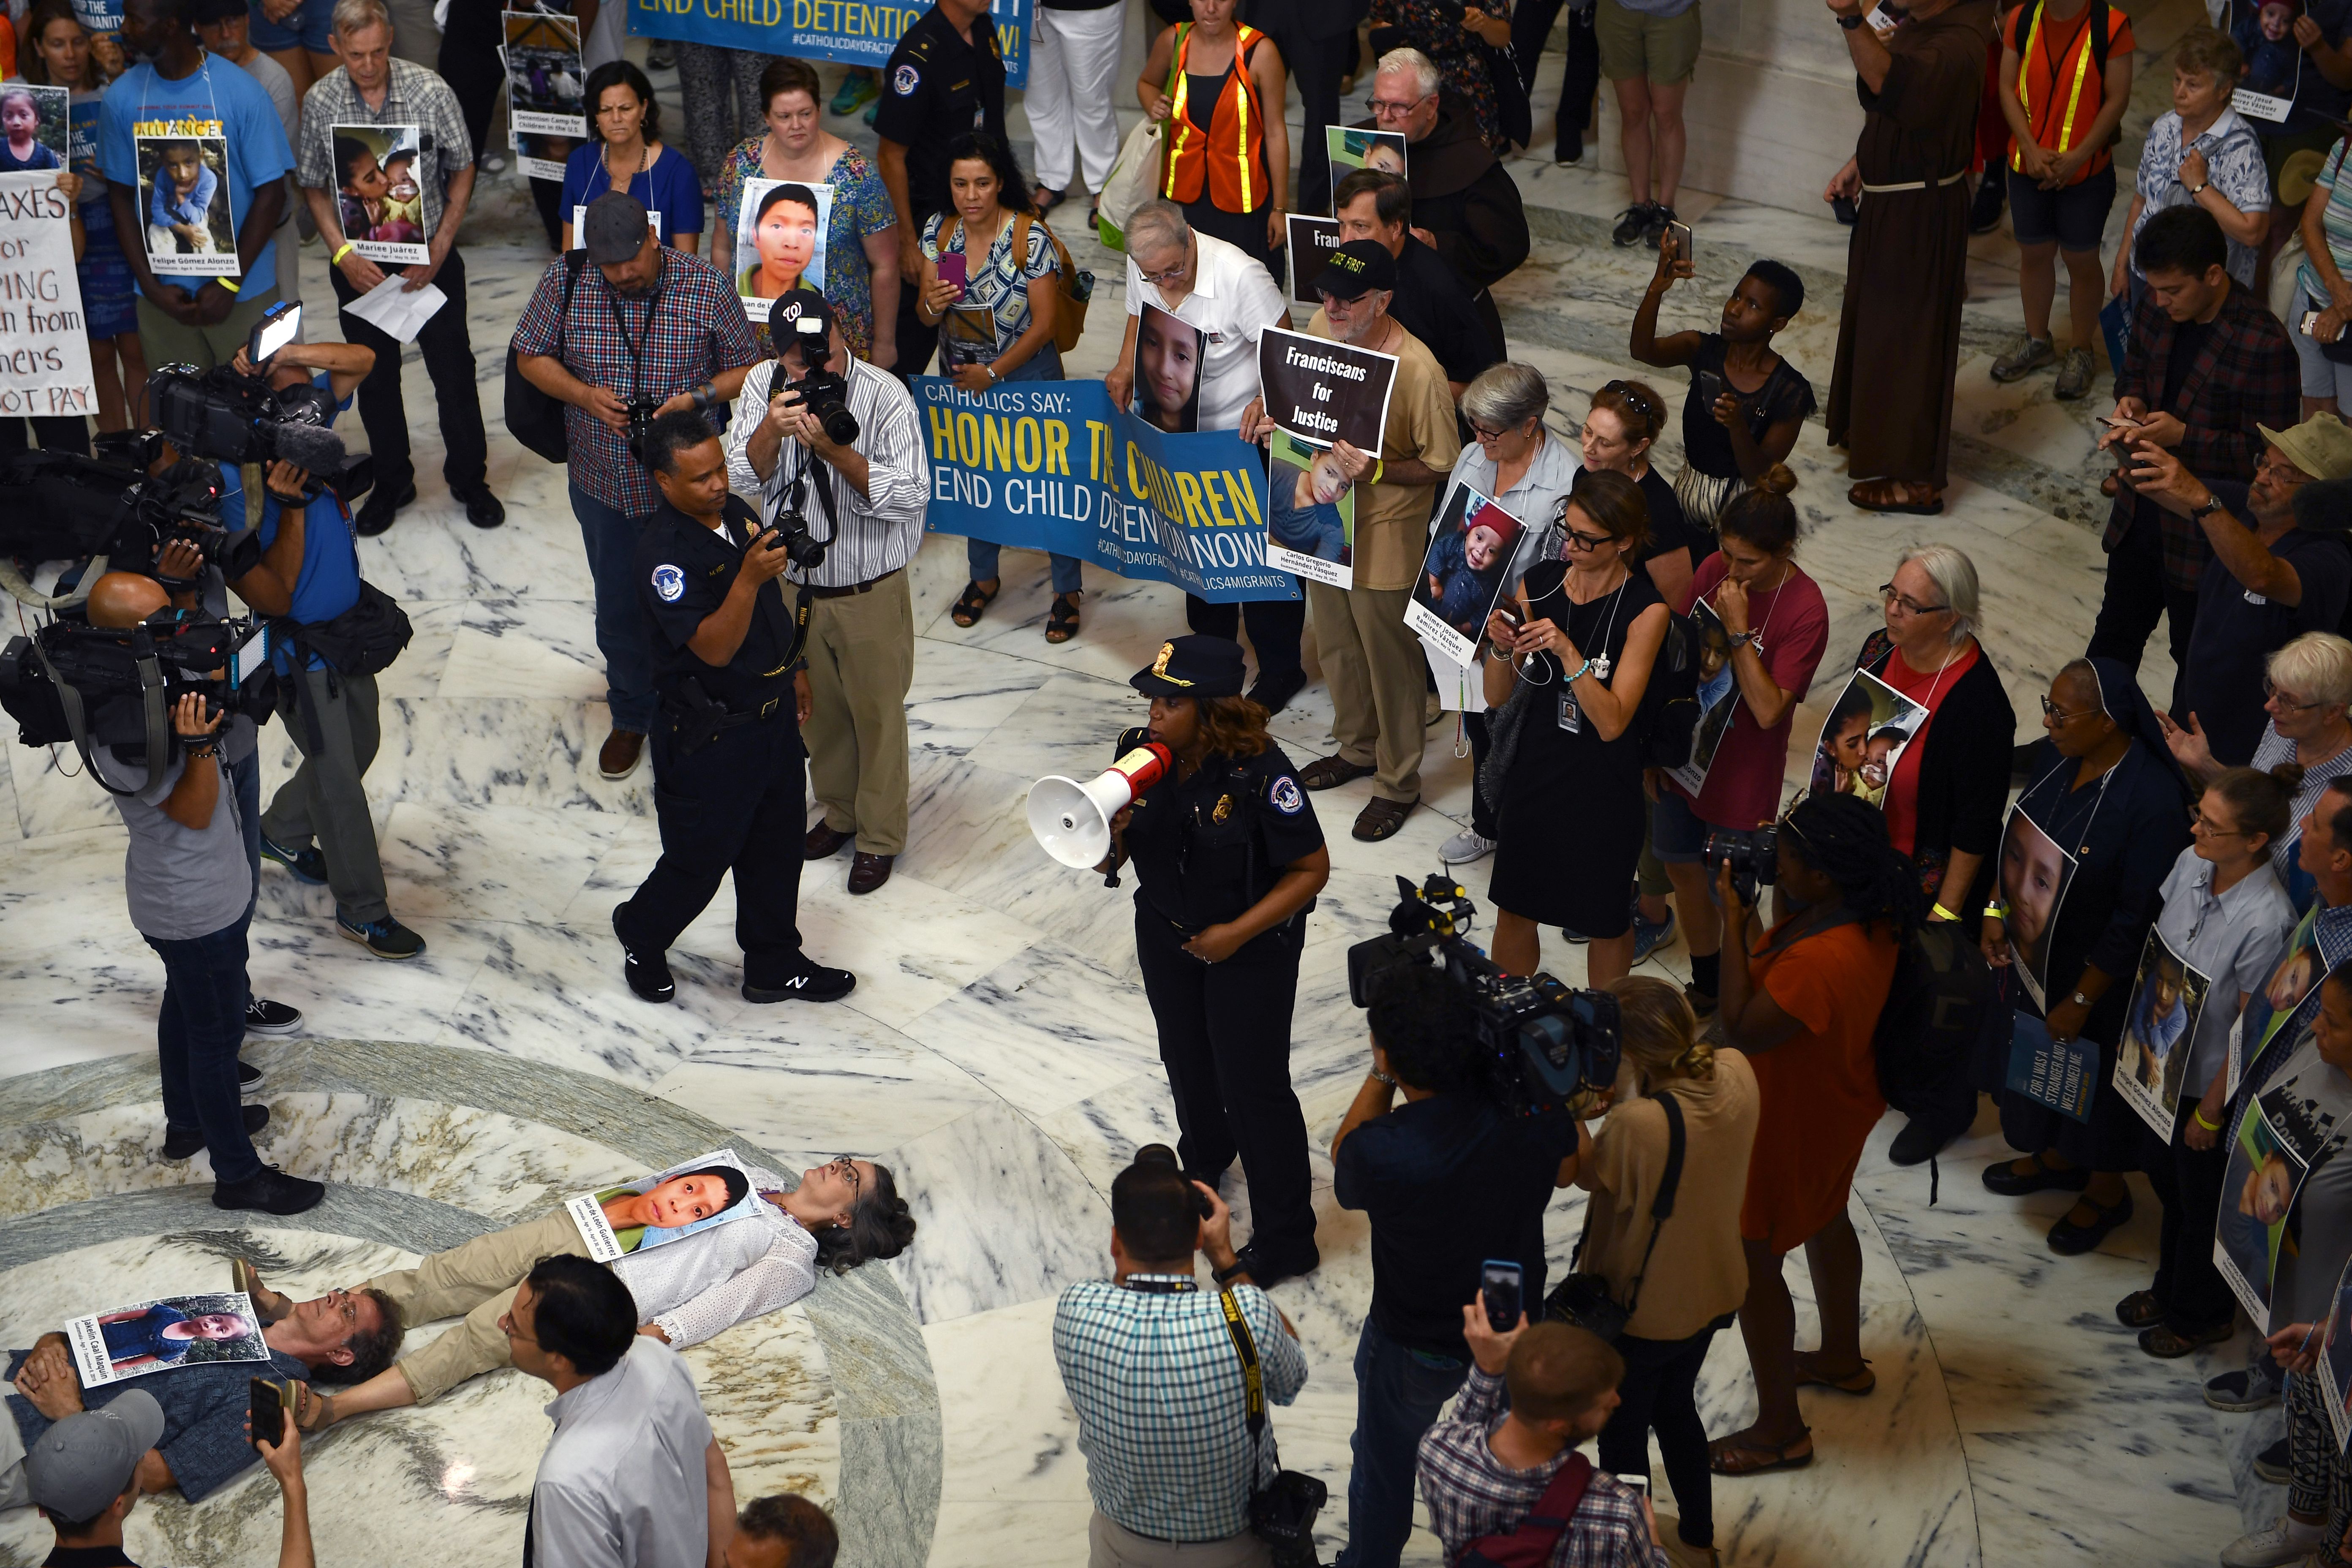 Members of the Franciscan Action Network holds a prayer vigil to "end the abuse and detention of children at the Russell Senate Office Building on Capitol Hill in Washington, DC, on July 18, 2019. (Photo by Brendan Smialowski / AFP) (Photo credit should read BRENDAN SMIALOWSKI/AFP/Getty Images)